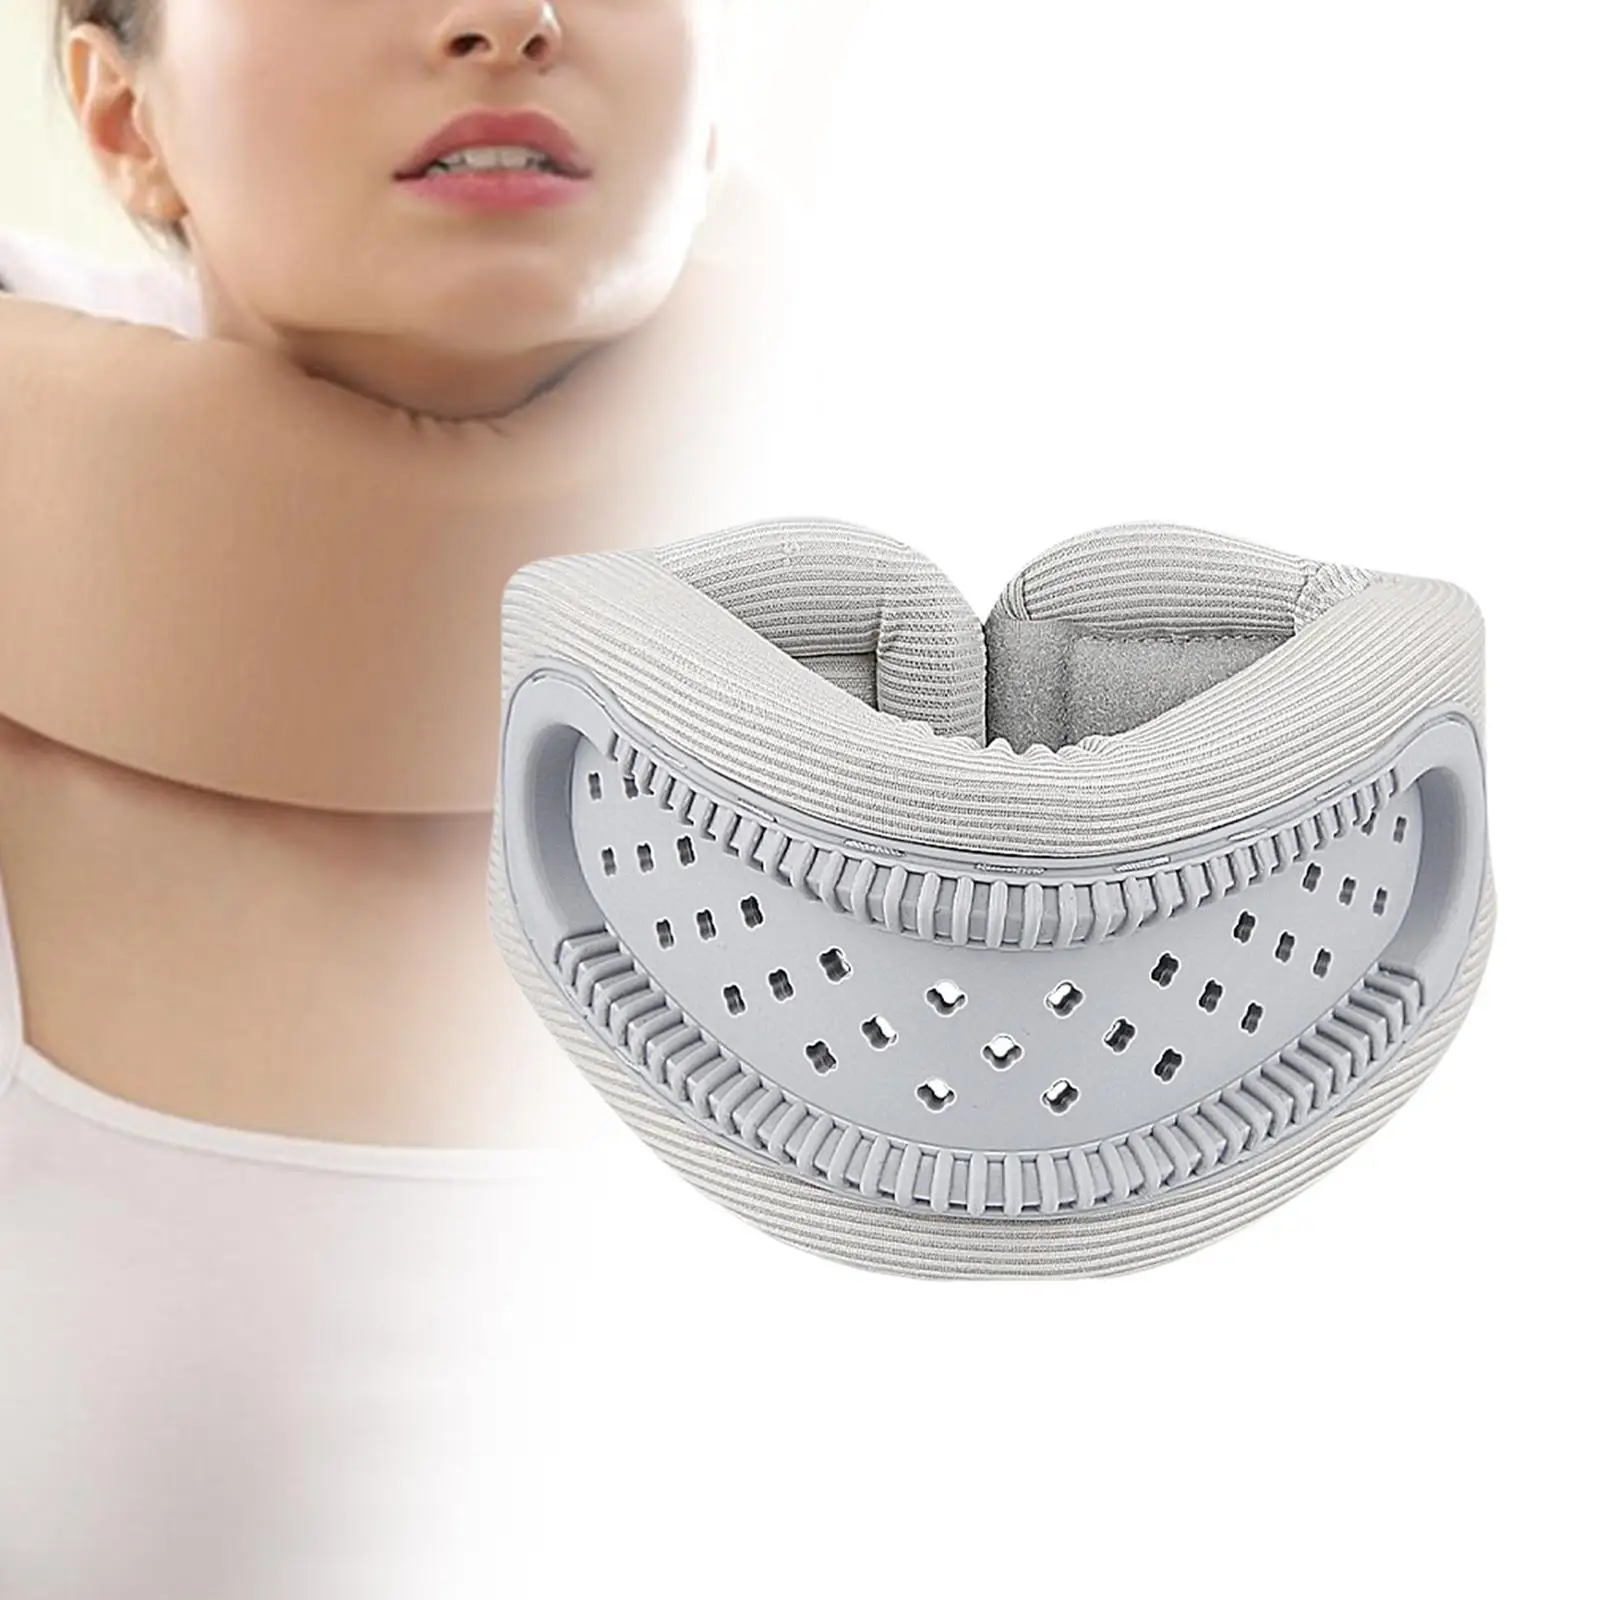 Neck Brace Comfortable Breathable Adjustable Compact Portable Soft Hollow Neck Support for Plane Sleeping Women Men Office Home